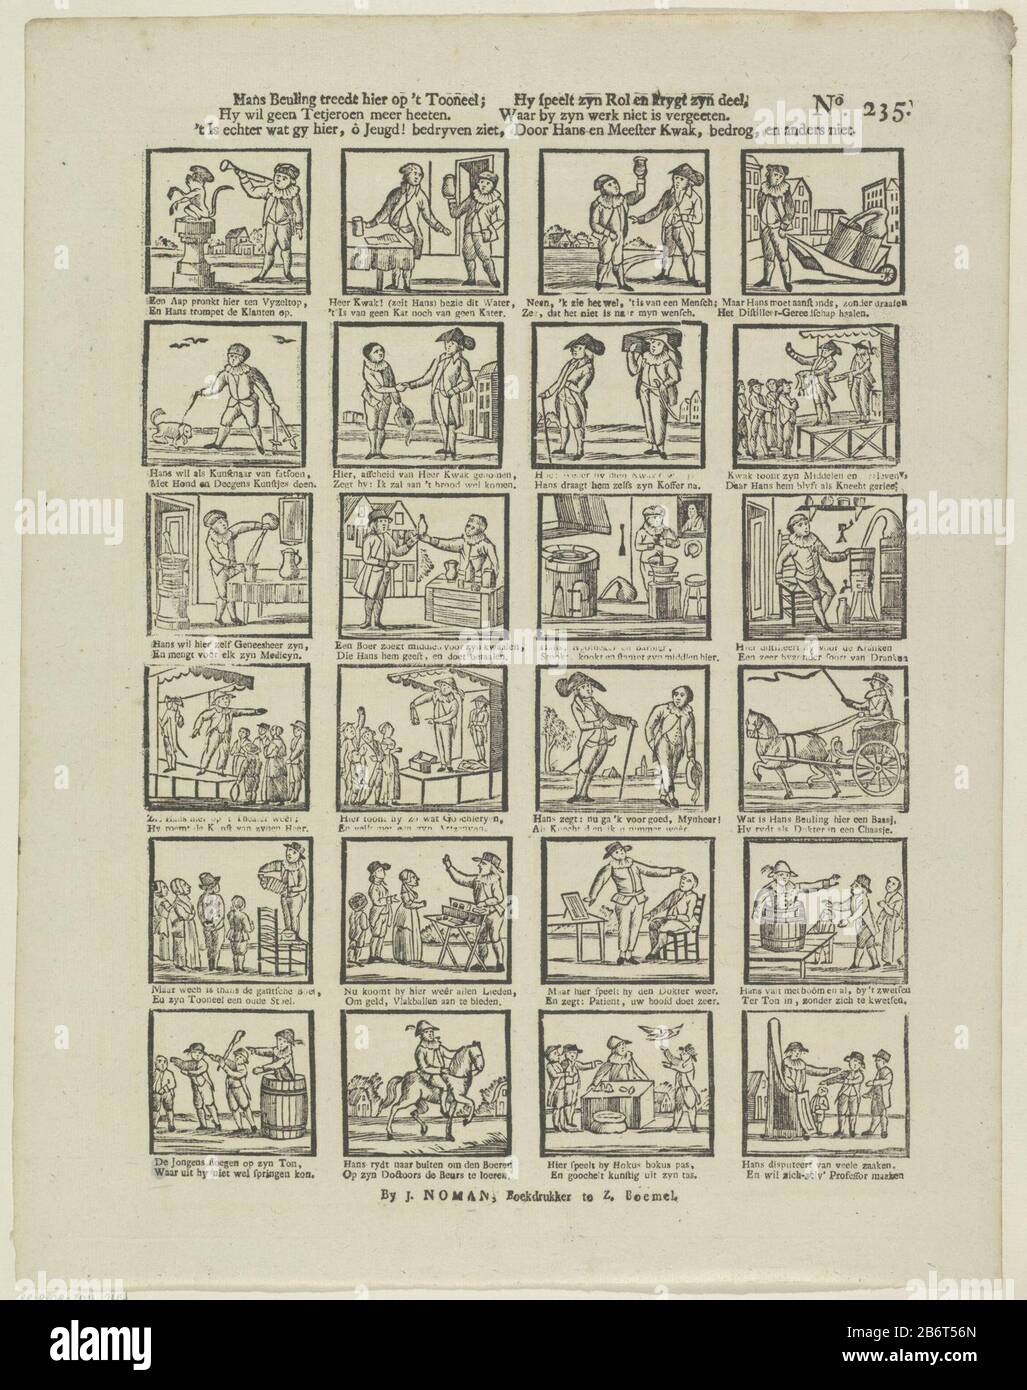 Hans Beuling treedt hier op 't toneel Hy wil geen Tetjeroen meer heeten () (titel op object) Leaf with 24 performances over the life of the quack and prankster Hans Sausage. Under each image a two-line verse. Numbered upper right: No. 235. Manufacturer : Publisher: Johan Noman (listed building) printmaker: anonymous place manufacture: publisher: Zaltbommel Print Author: Netherlands Date: 1806 - 1830 Physical features: woodcut and text printing material: paper Technique: woodcut / printing sizes: sheet: H 407 mm × W 318 mm Subject: quack, charlatan, mountebank, 'saltimbanco'passenger carriage Stock Photo